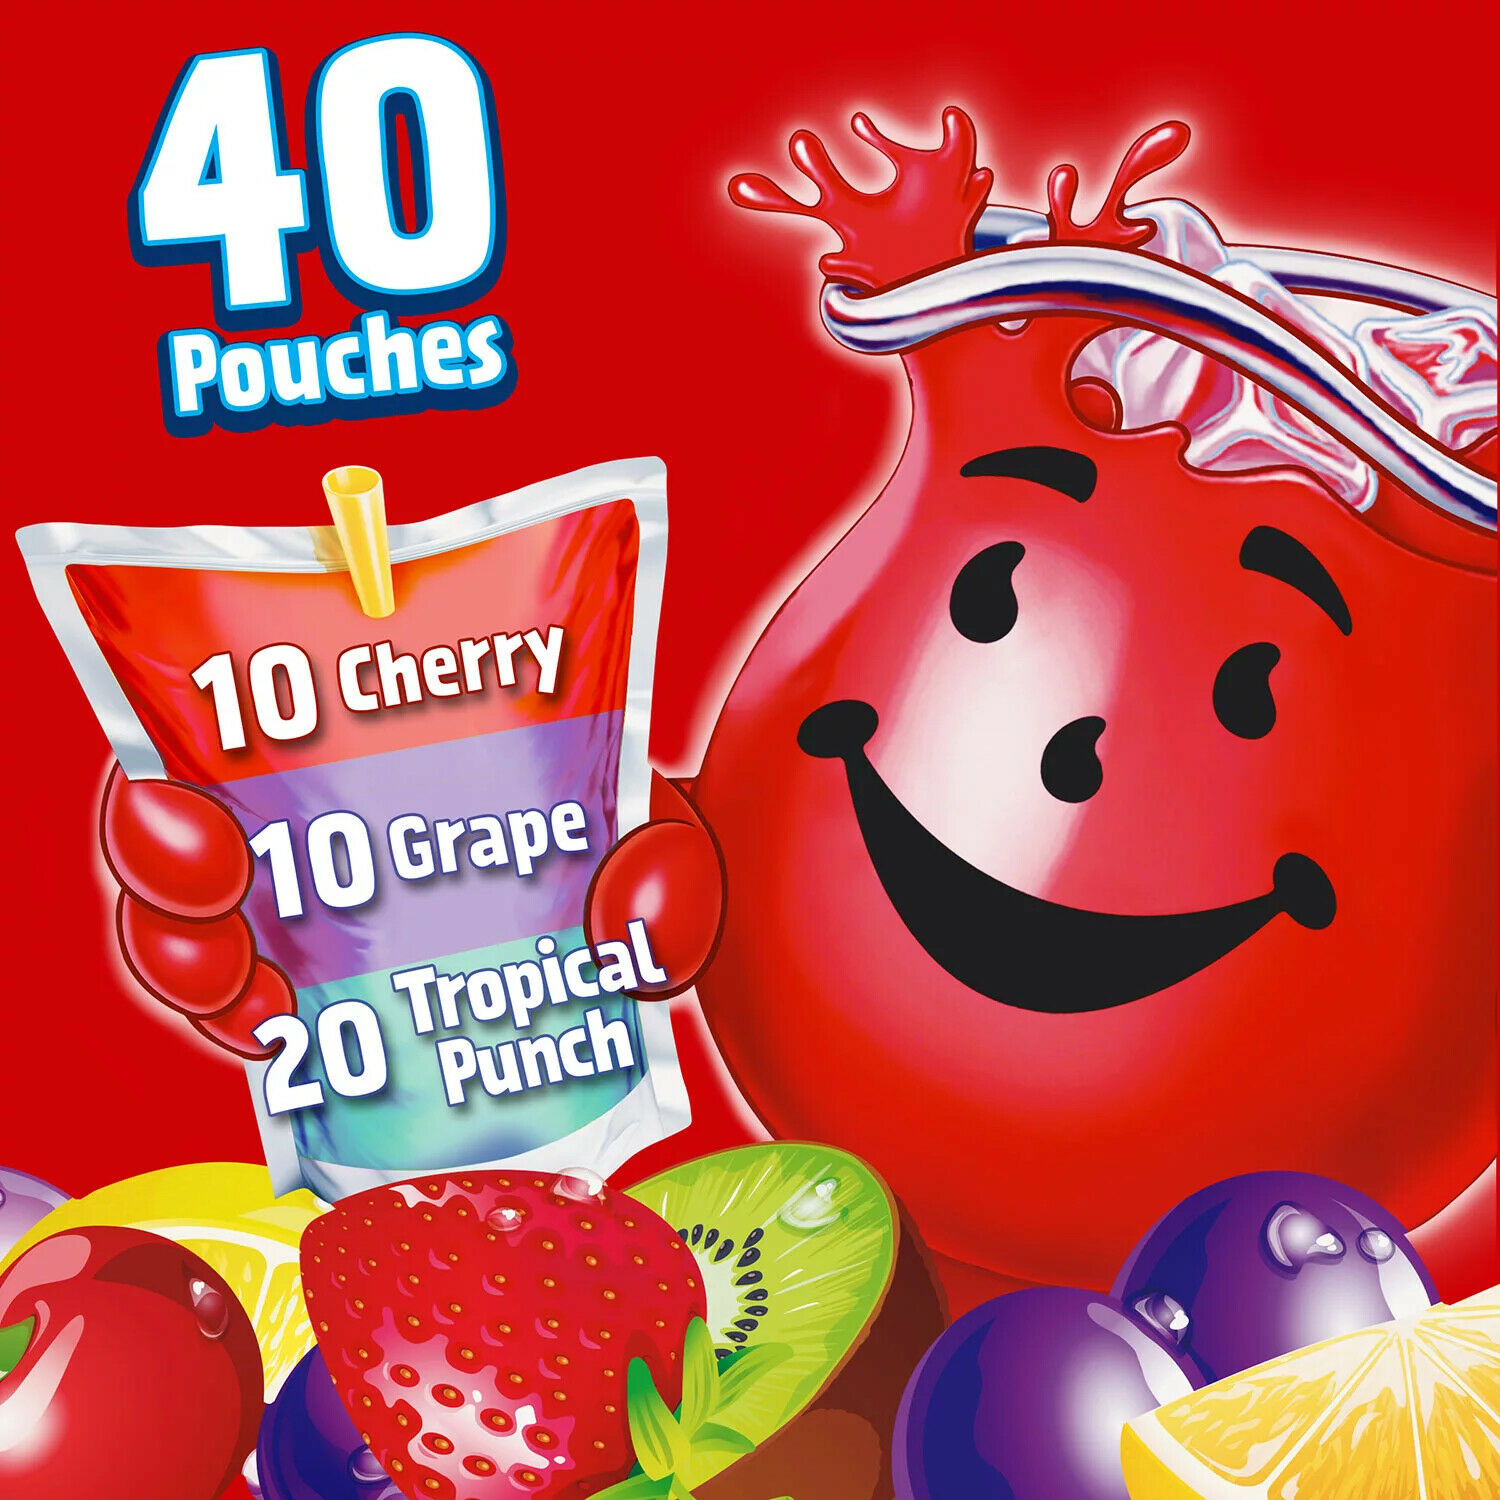 KOOL AID JAMMERS VARIETY PACK GREAT FOR LUNCHBOXES, CHERRY (40 POUCHES PER BOX)